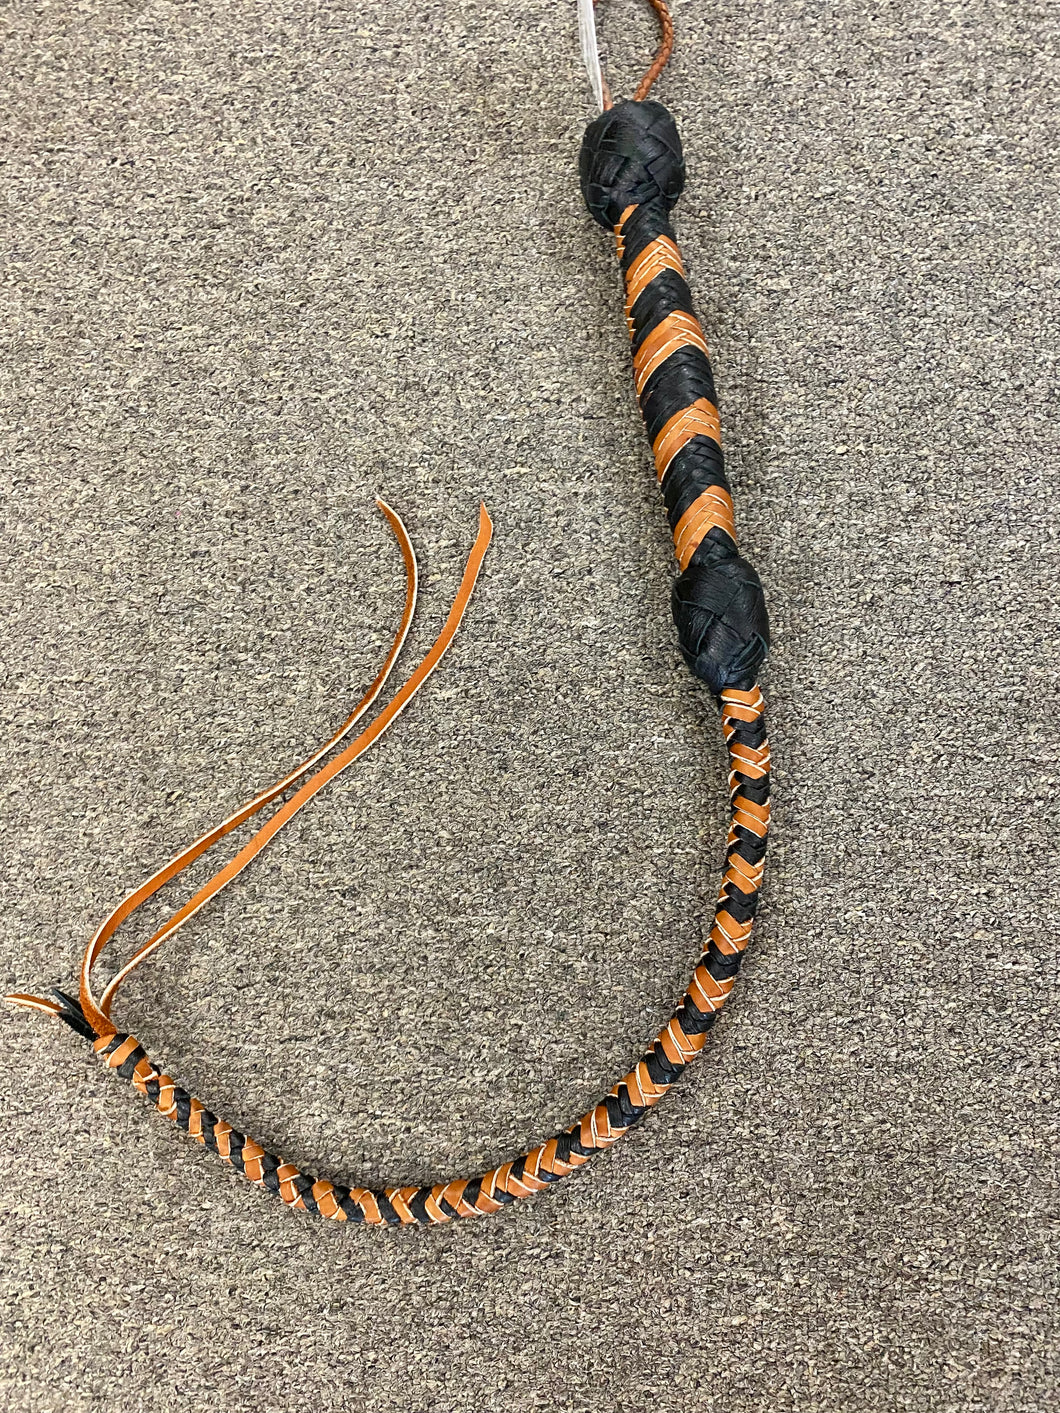 BLACK AND BROWN LEATHER BRAIDED DOUBLE TAIL WHIP BY DAN HOUCHINS